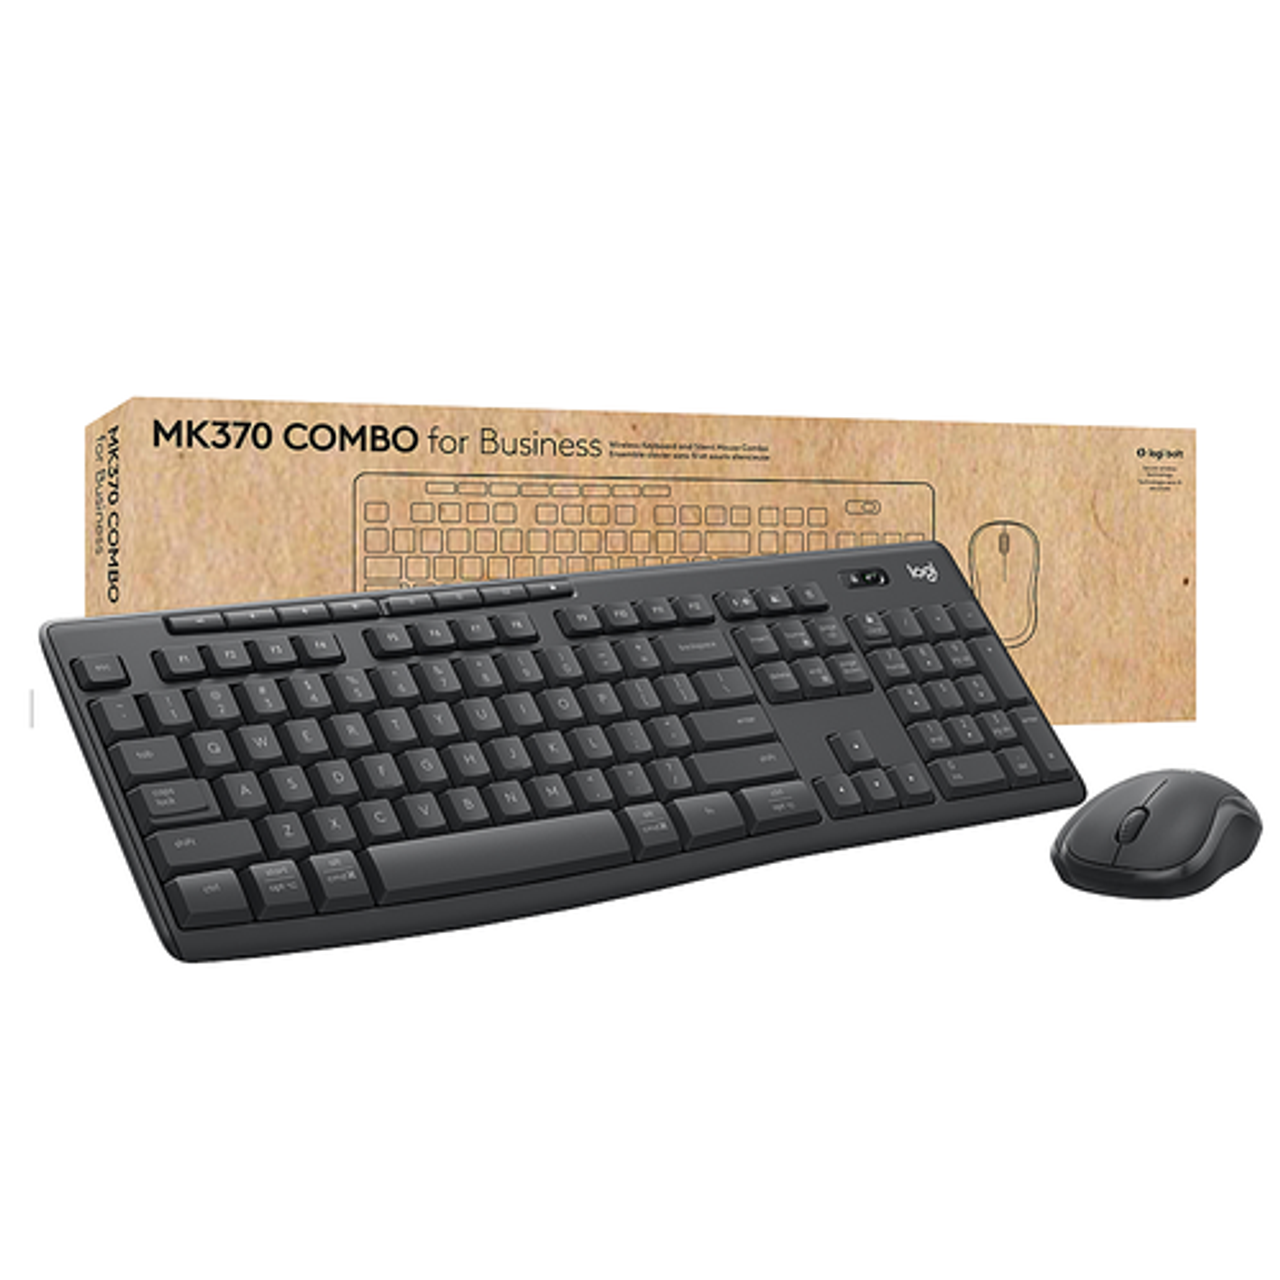 Logitech - MK370 Combo for Business Full-Size Wireless Keyboard and Mouse Bundle with Secure Logi Bolt USB Connection - Graphite